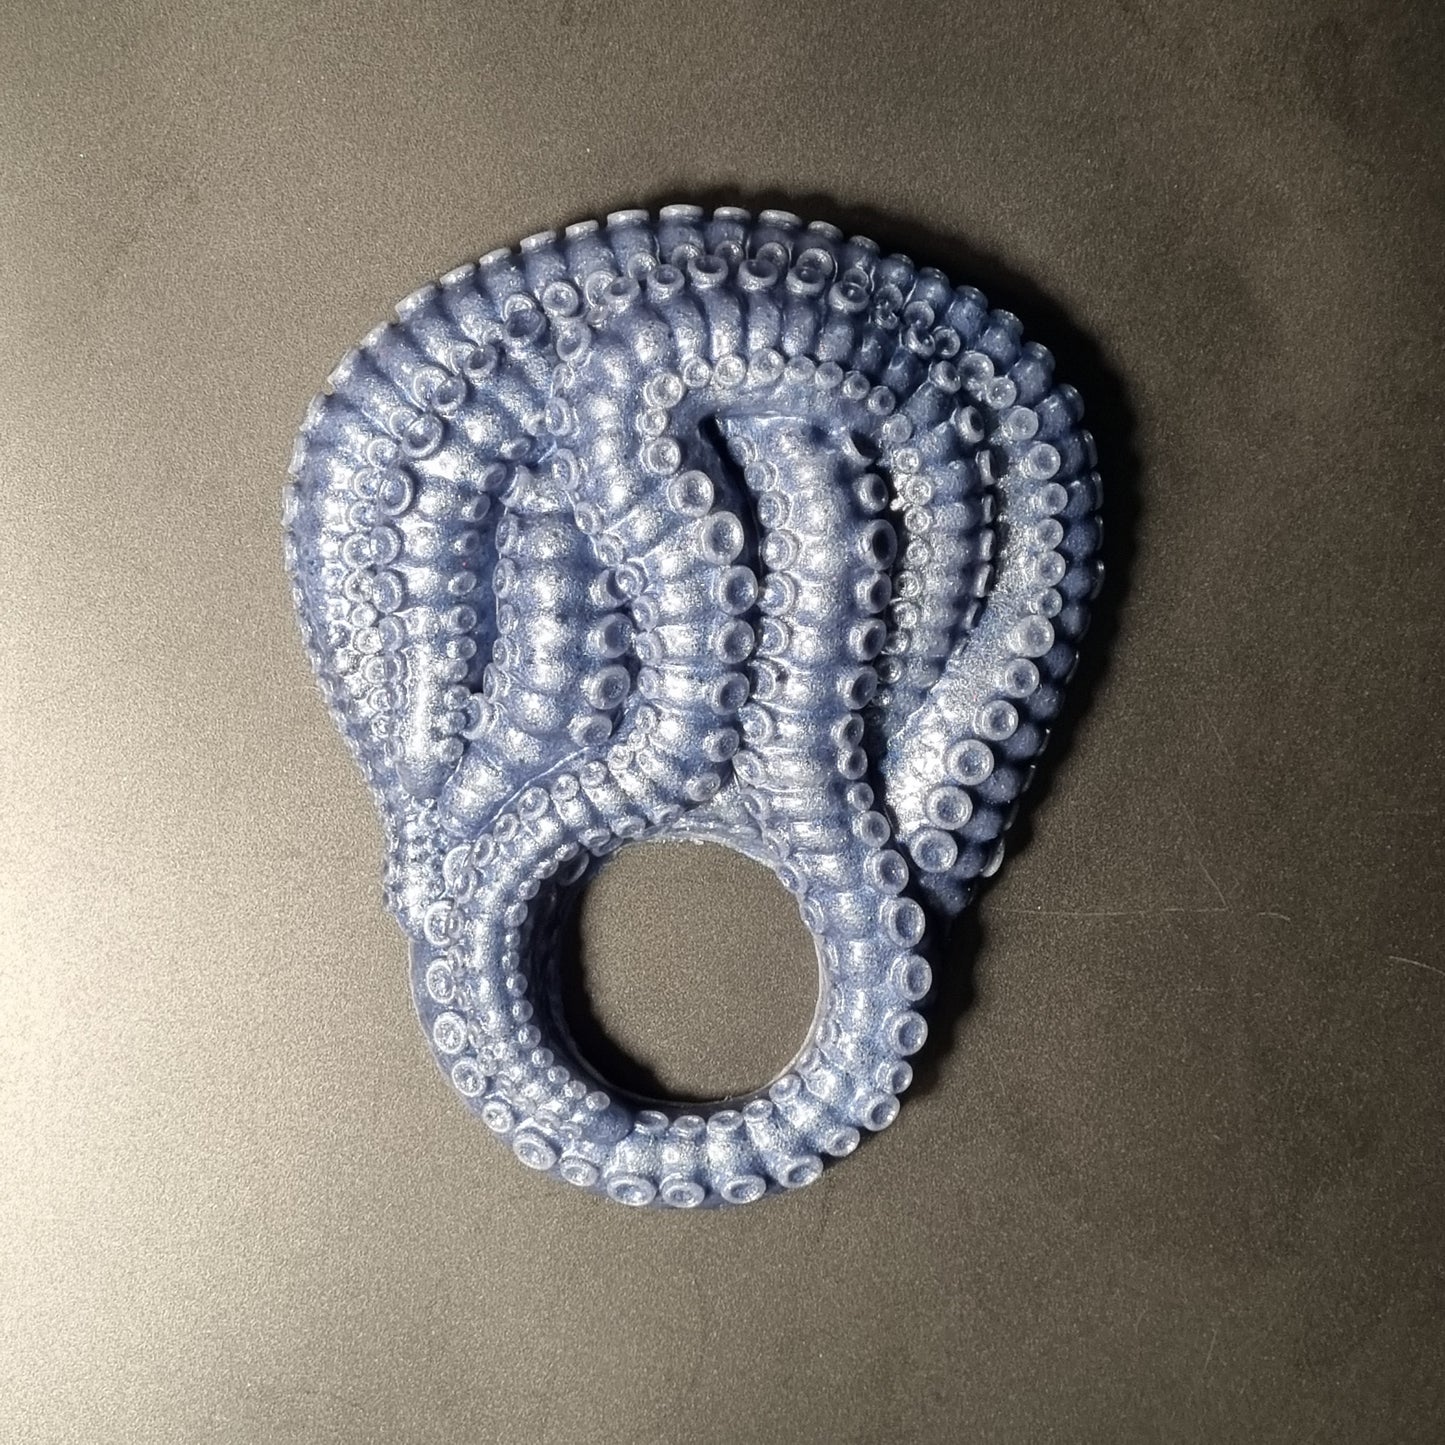 OD01 - Tentacle Grind Ring - Extra Soft